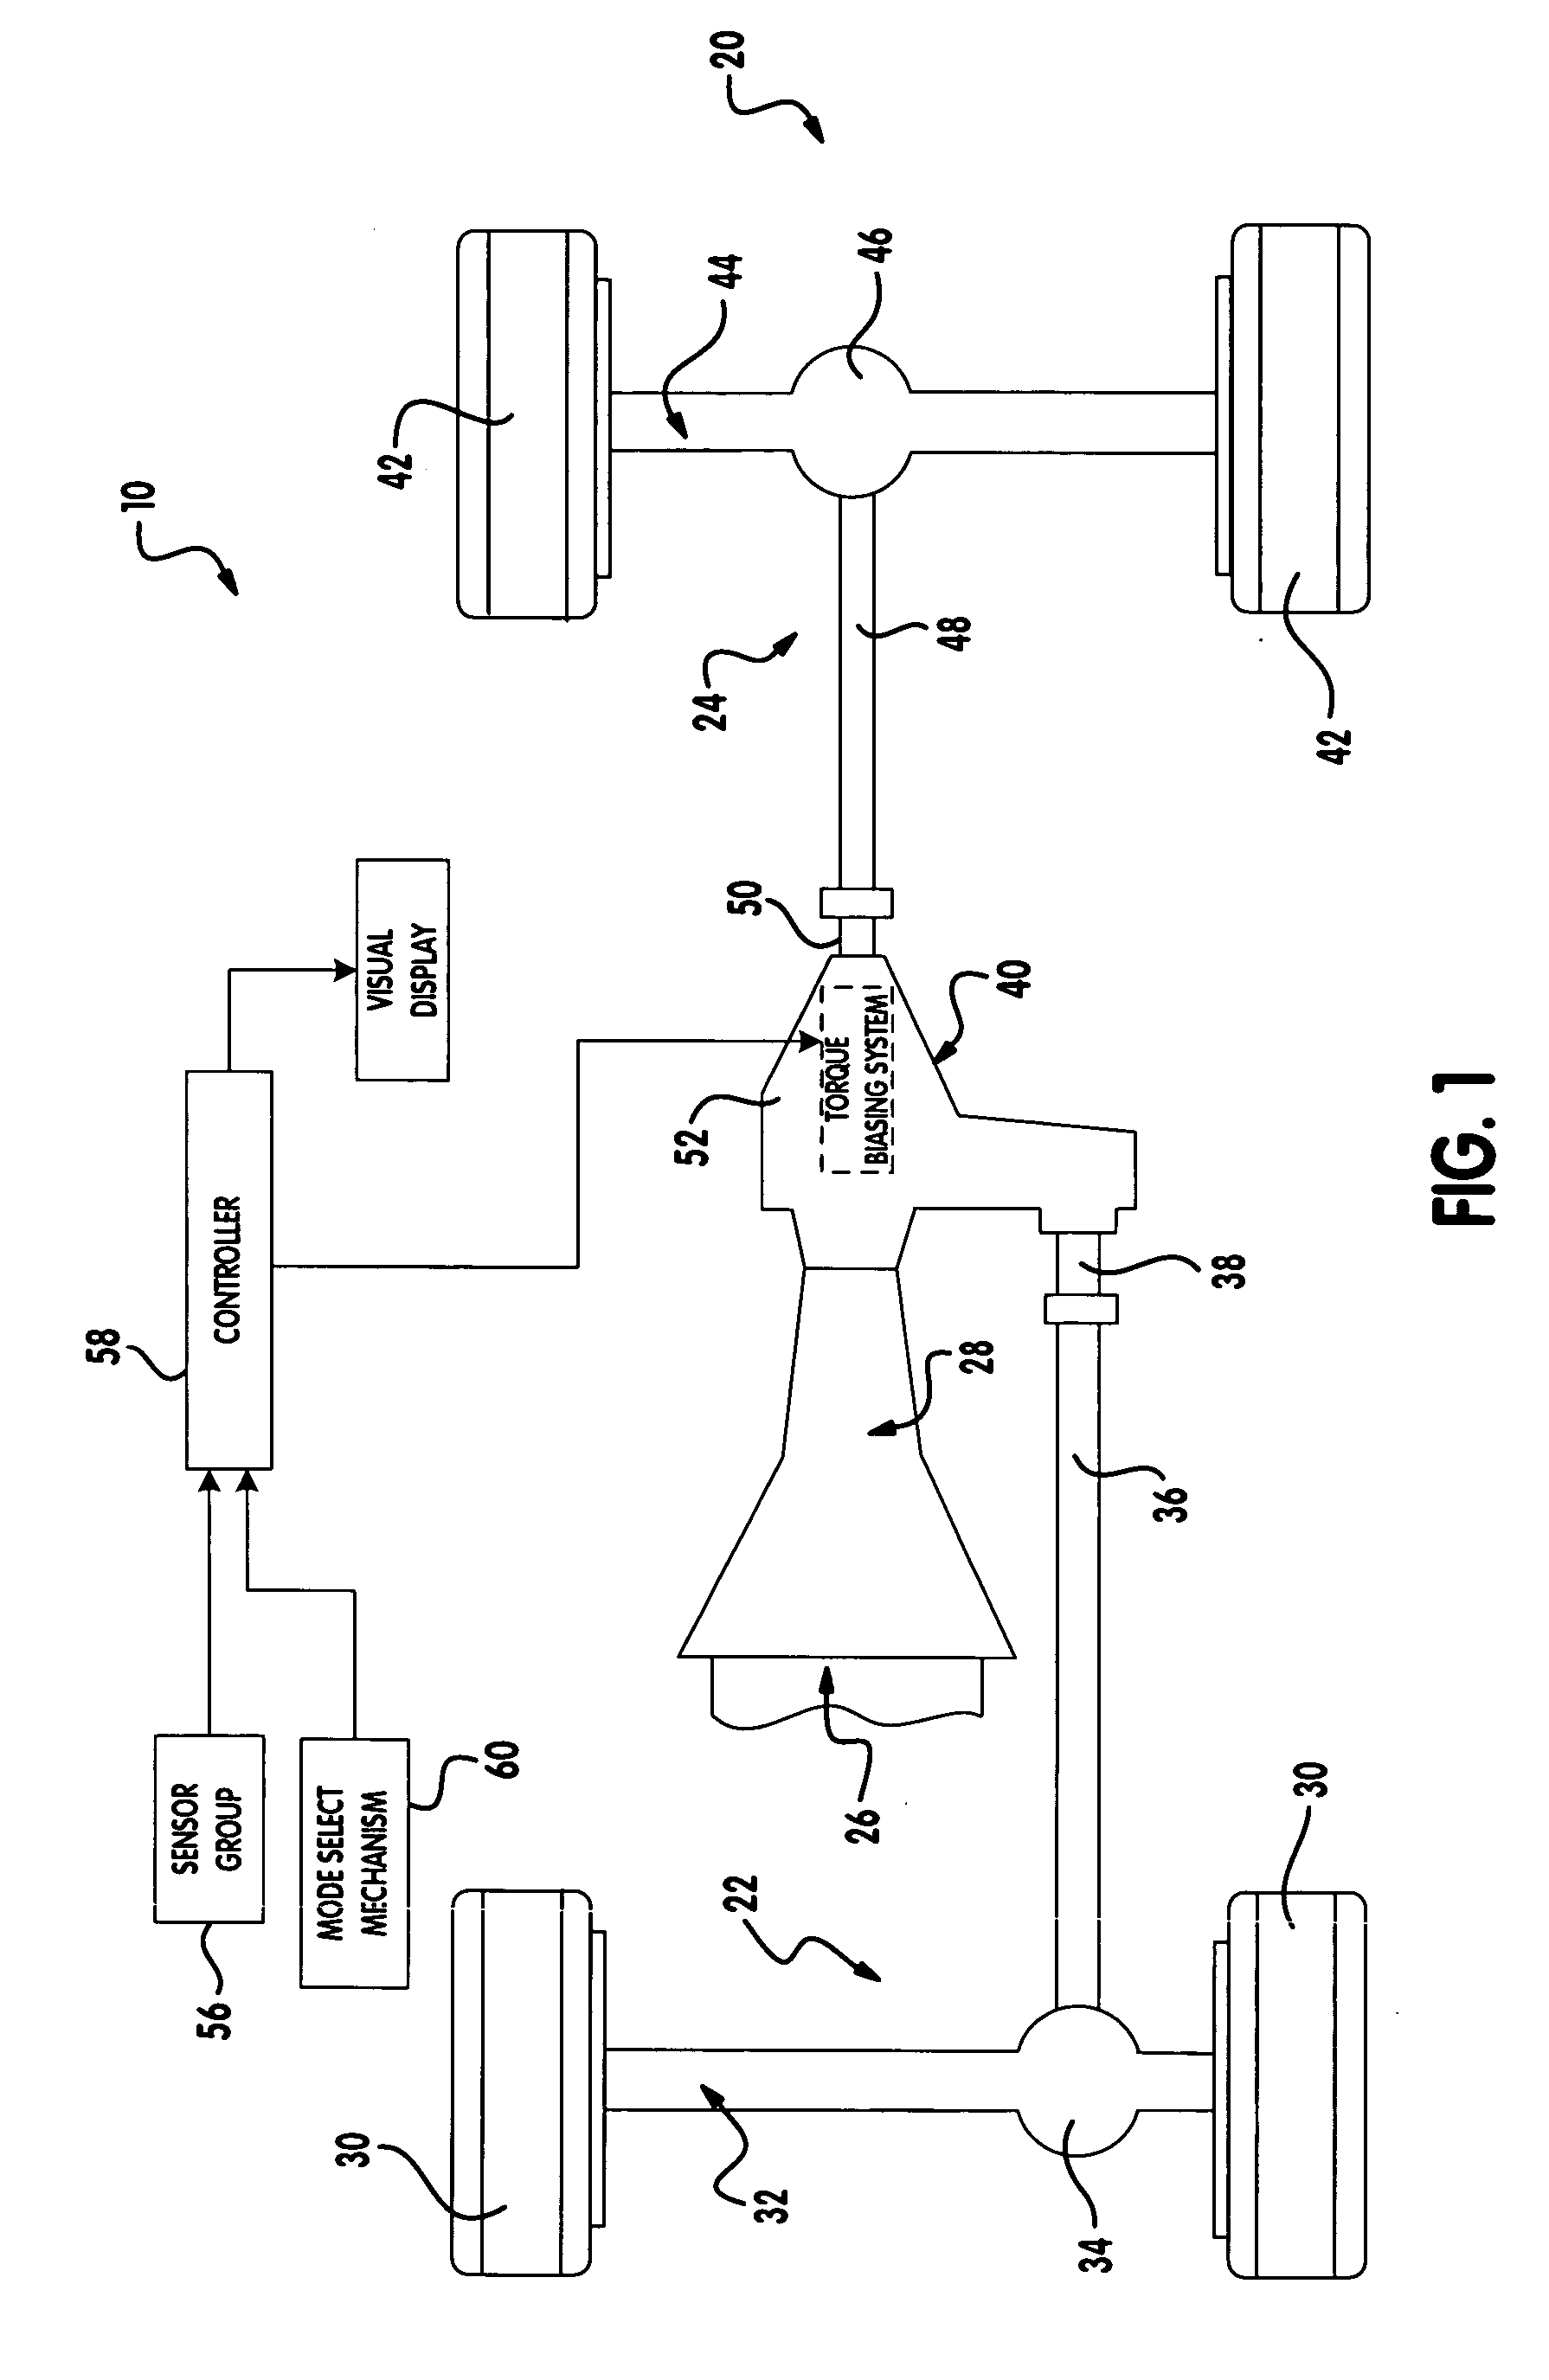 Model-based control for torque biasing system